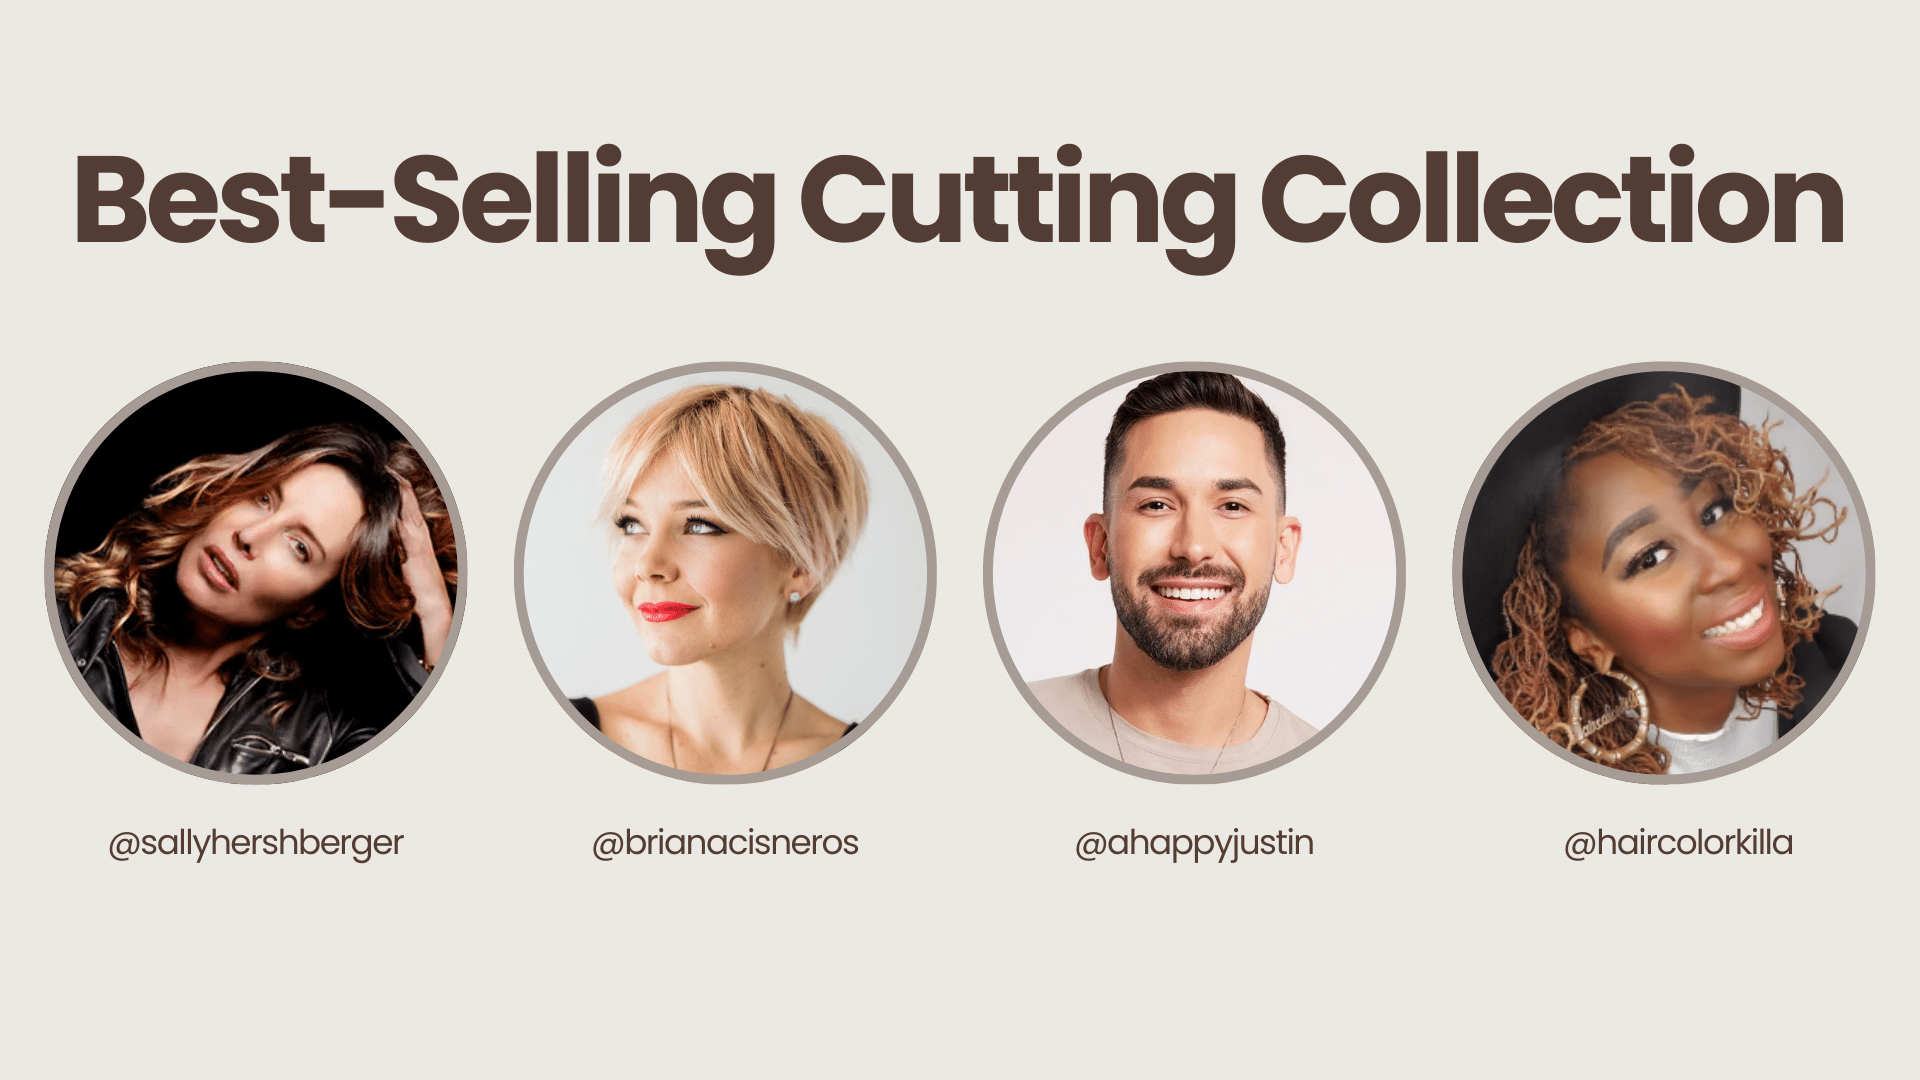 Best-Selling Cutting Collection